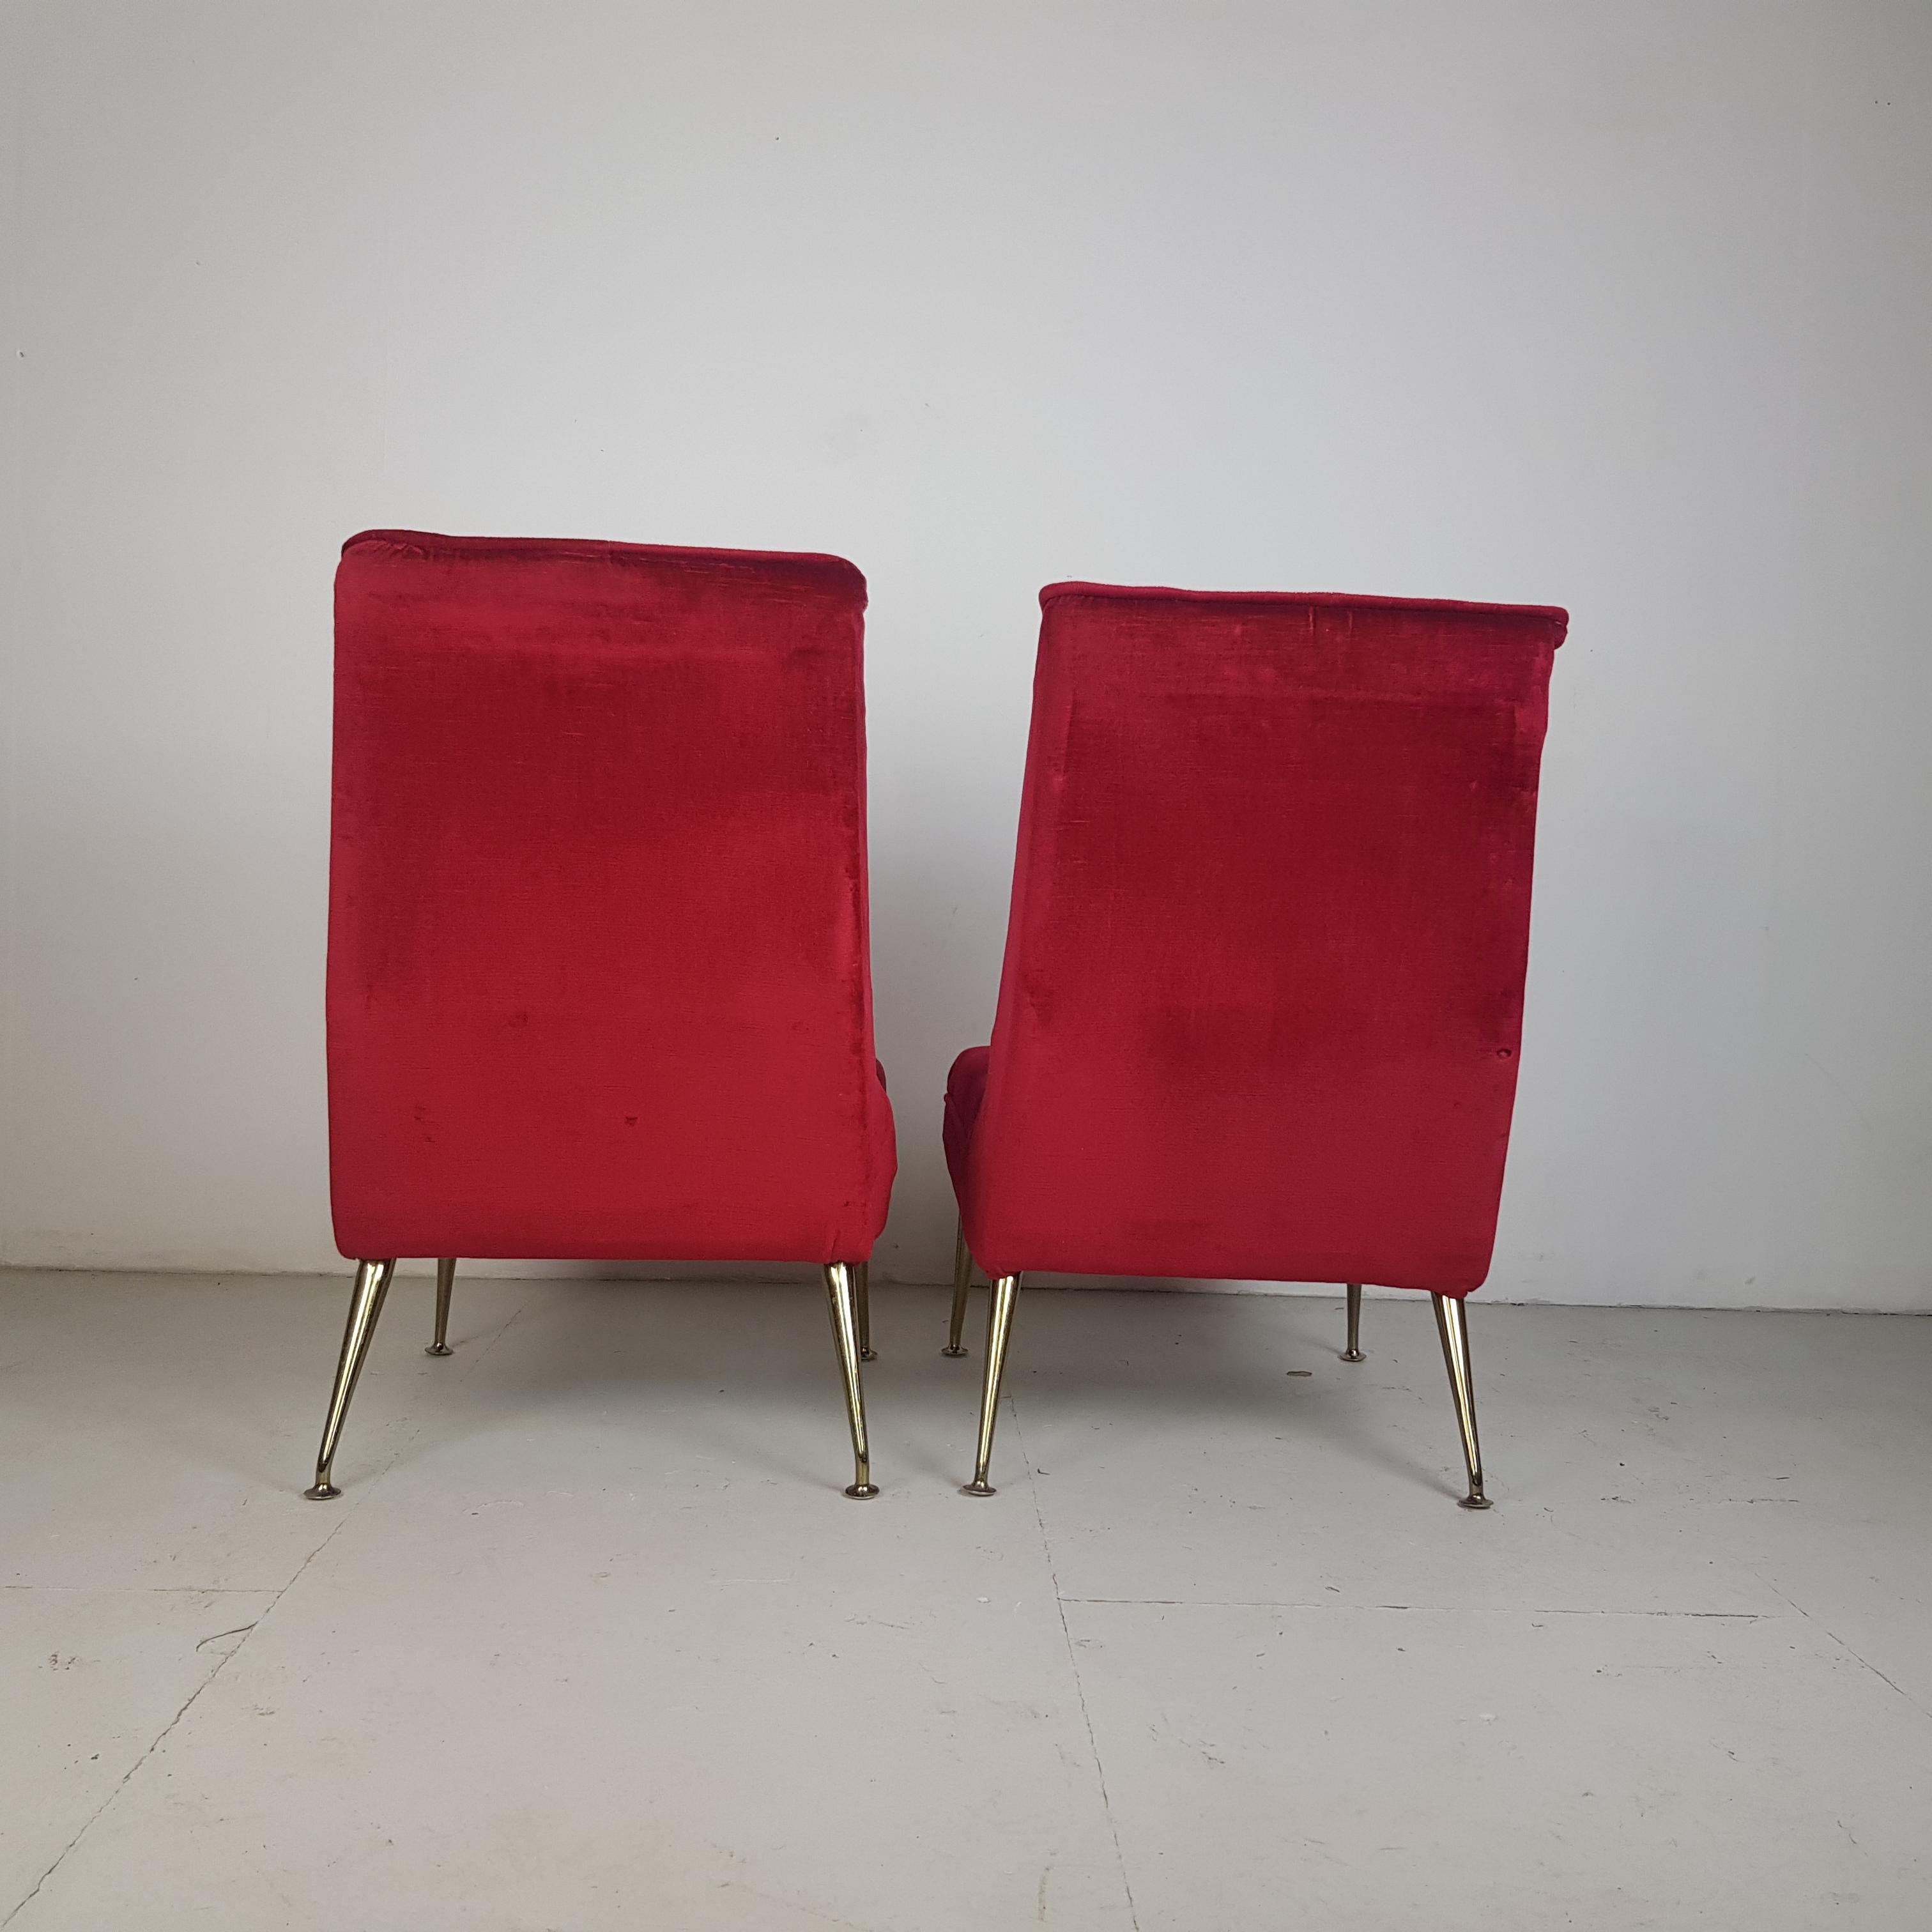 Vintage Midcentury Pair of 1950s Red Velvet and Brass Cocktail Chairs For Sale 1